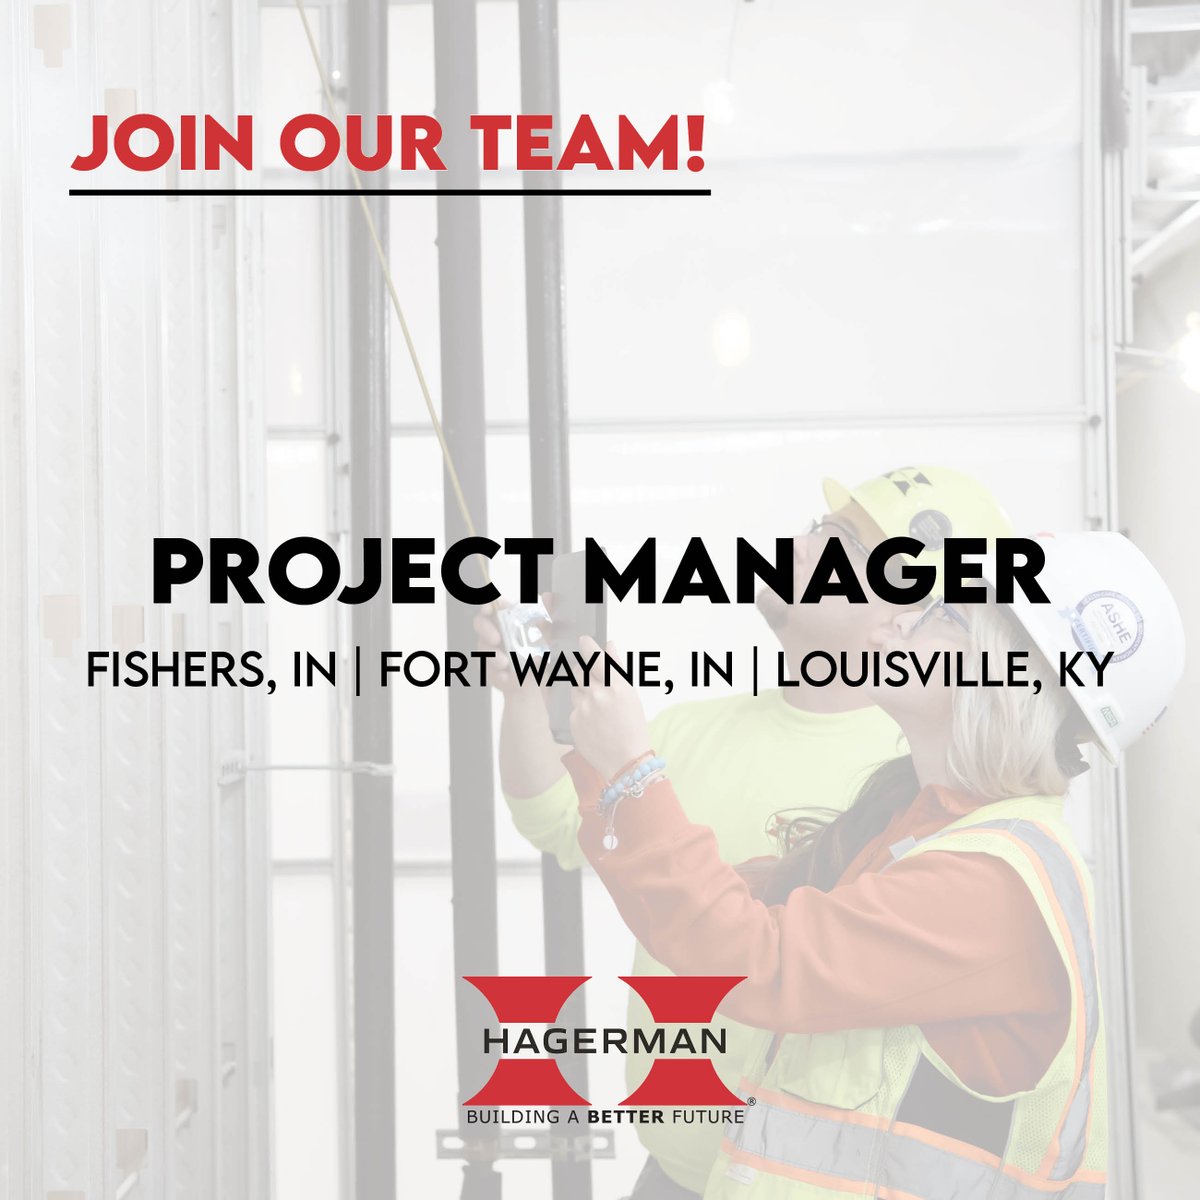 We're looking for experienced Project Managers! The ideal candidate has 5+ years of experience in the construction of large-scale projects. Is this you? #BuildingABetterFuture #AConstructionSolutionsProvider
Job descriptions➡️ tinyurl.com/HagermanCareers